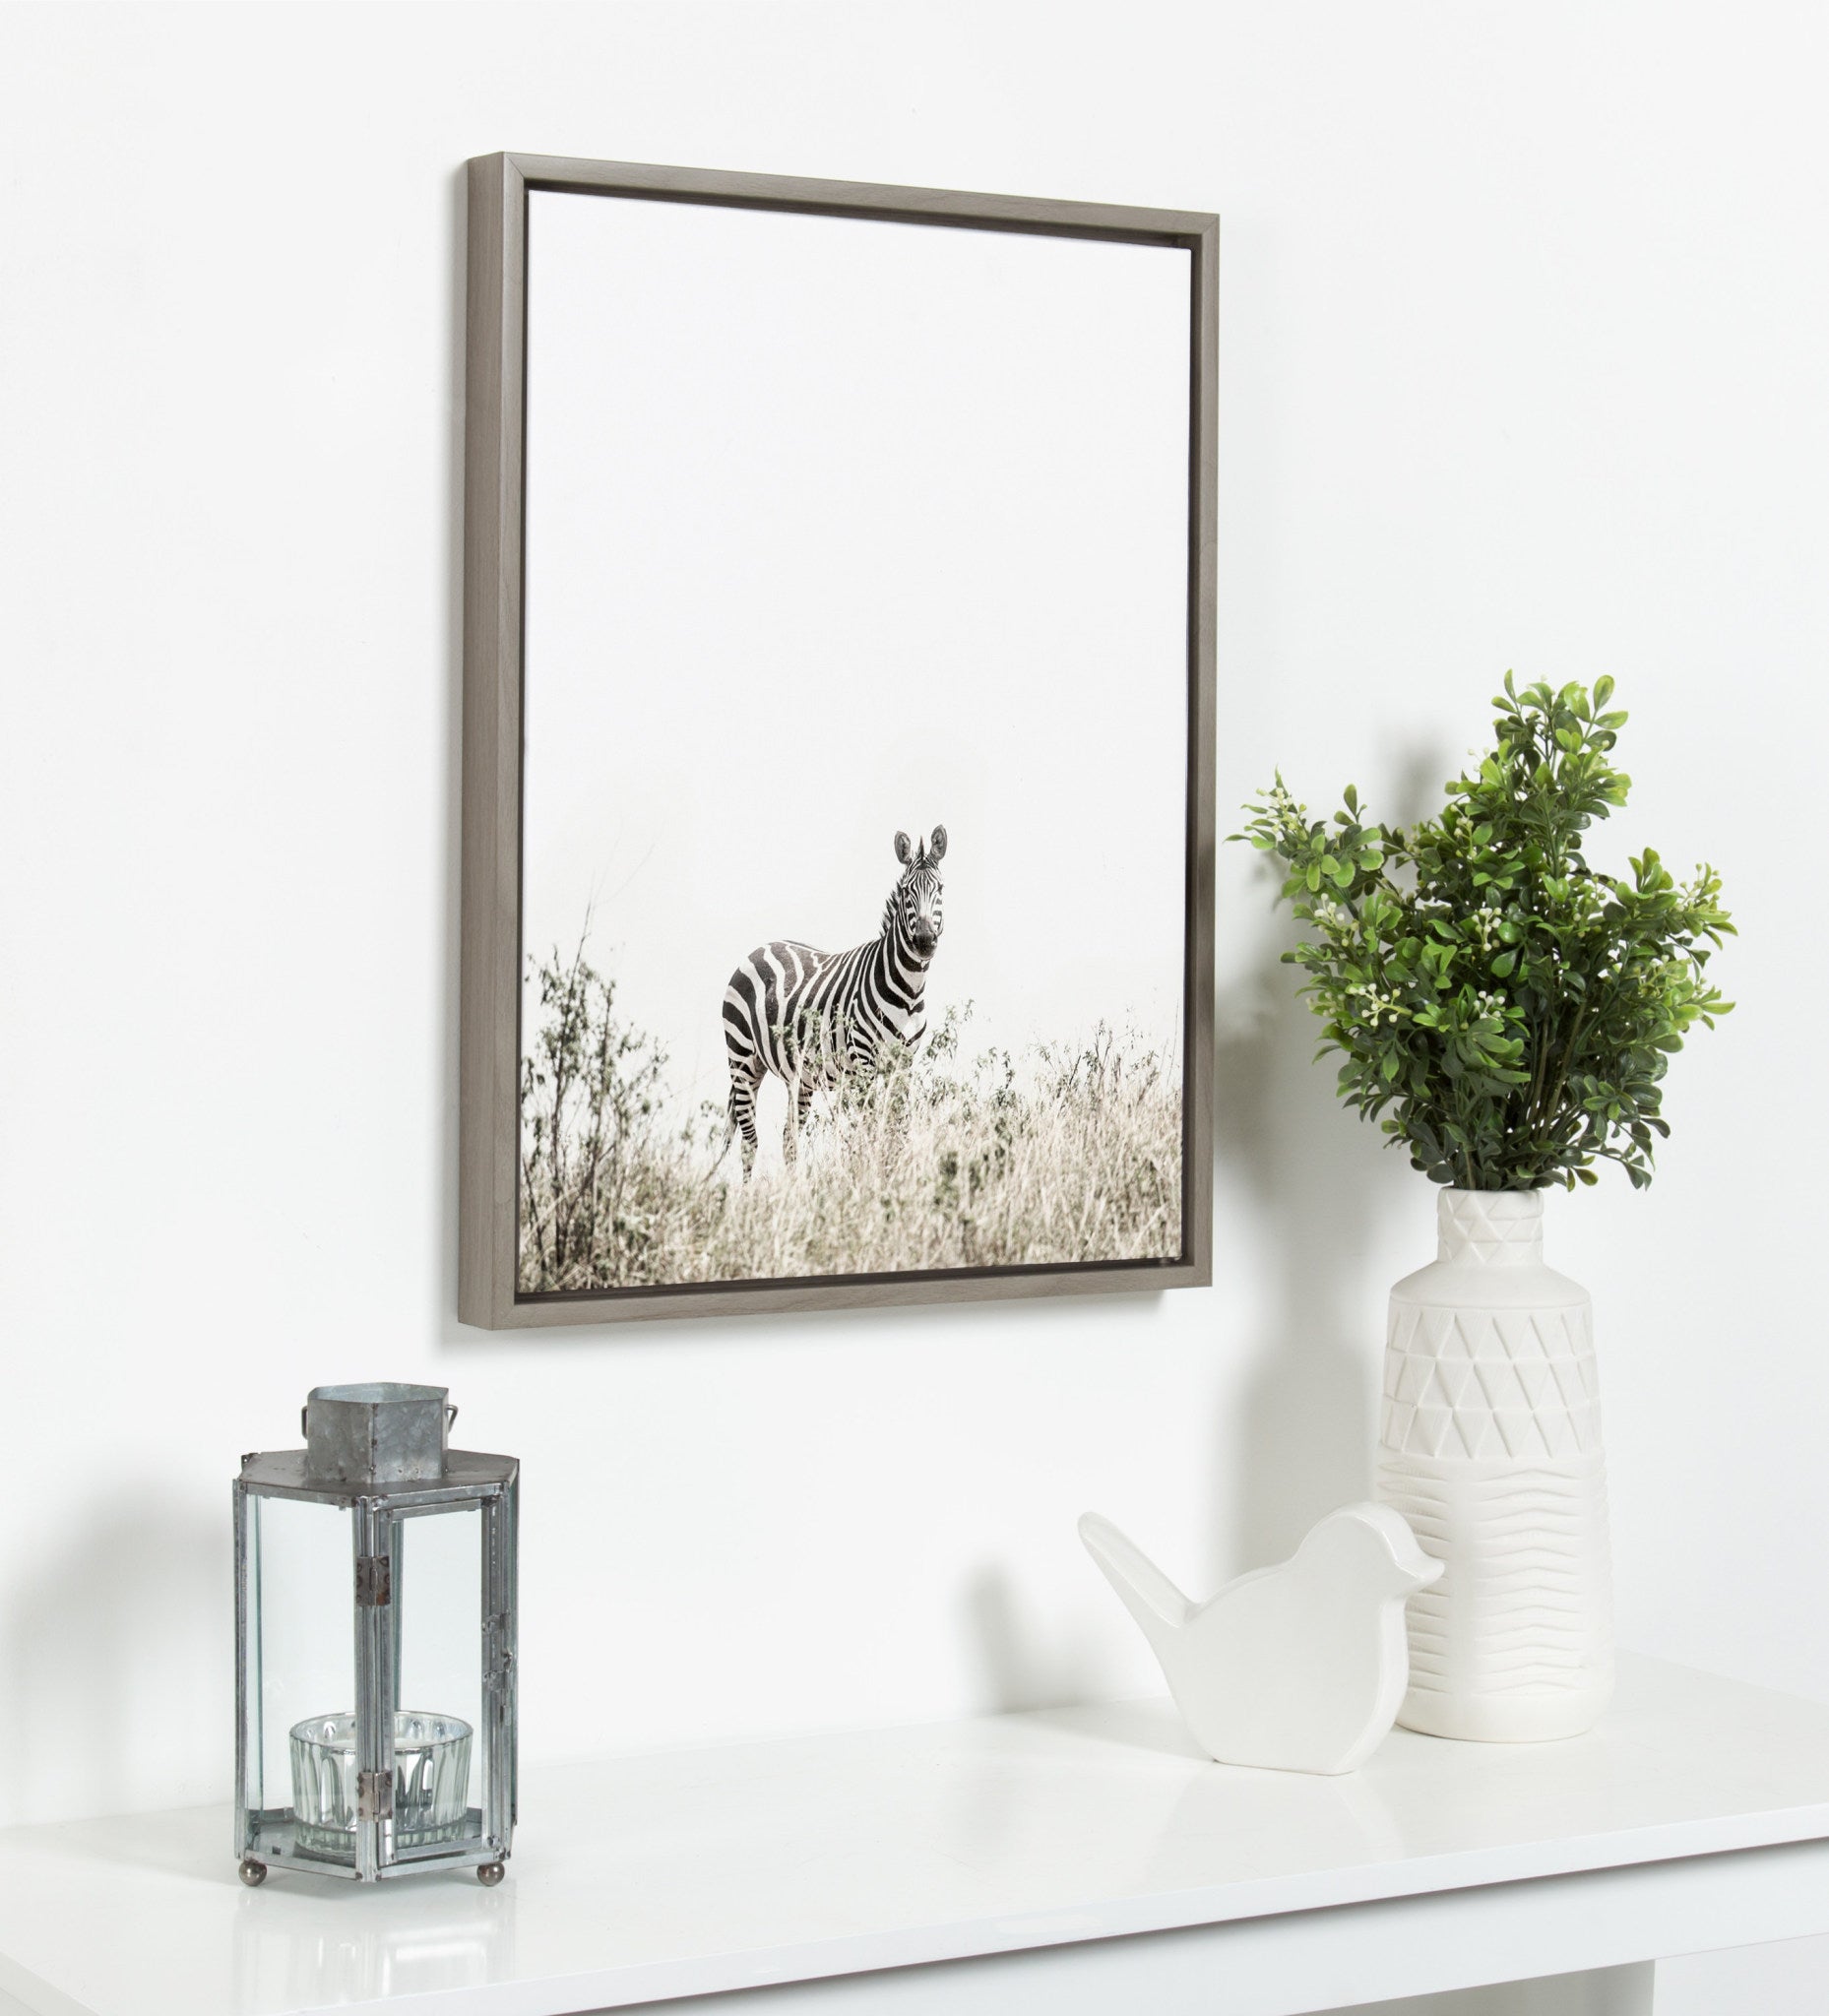 Sylvie Zebra In Tall Grass Framed Canvas By Amy Peterson